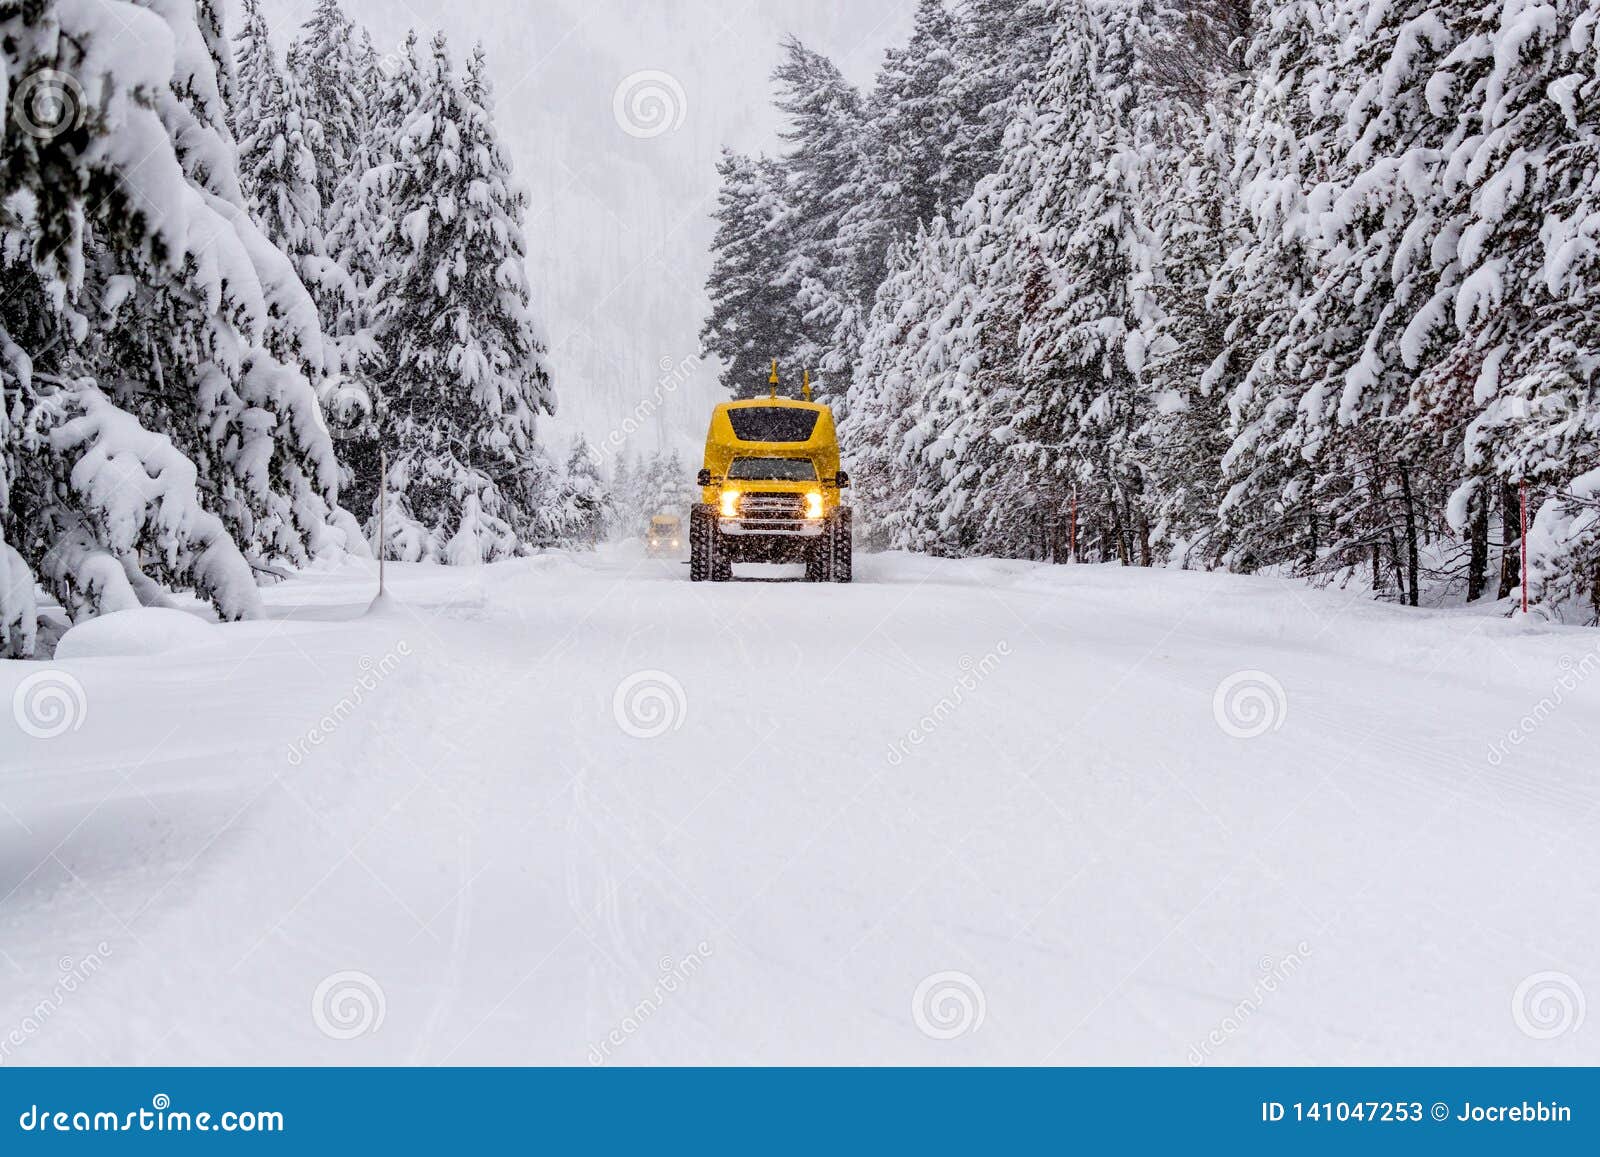 heavy duty snow bus vehicle plows over snow of highway 20 in yellowstone in winter